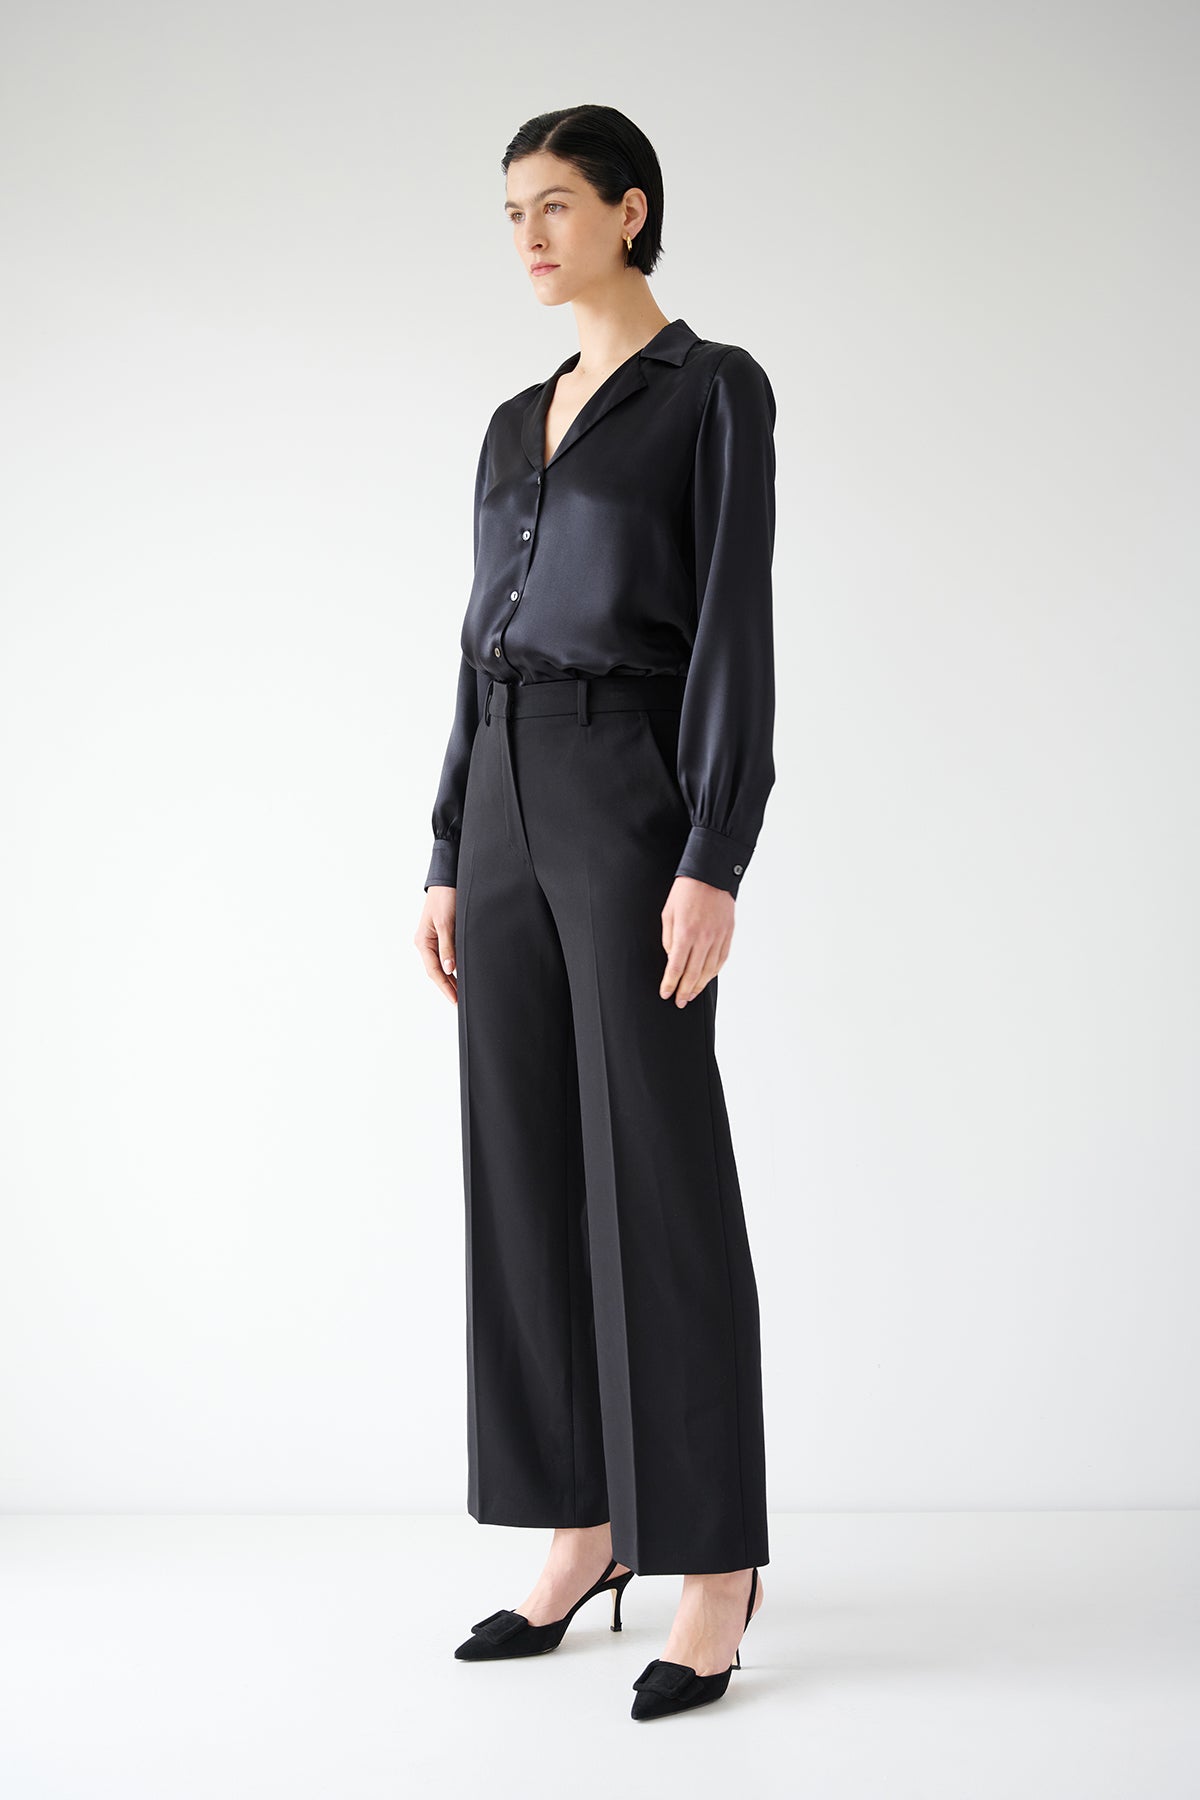   The model is wearing PRINCE PANT by Velvet by Jenny Graham, black straight-leg trousers with pleats, and a black blouse. 